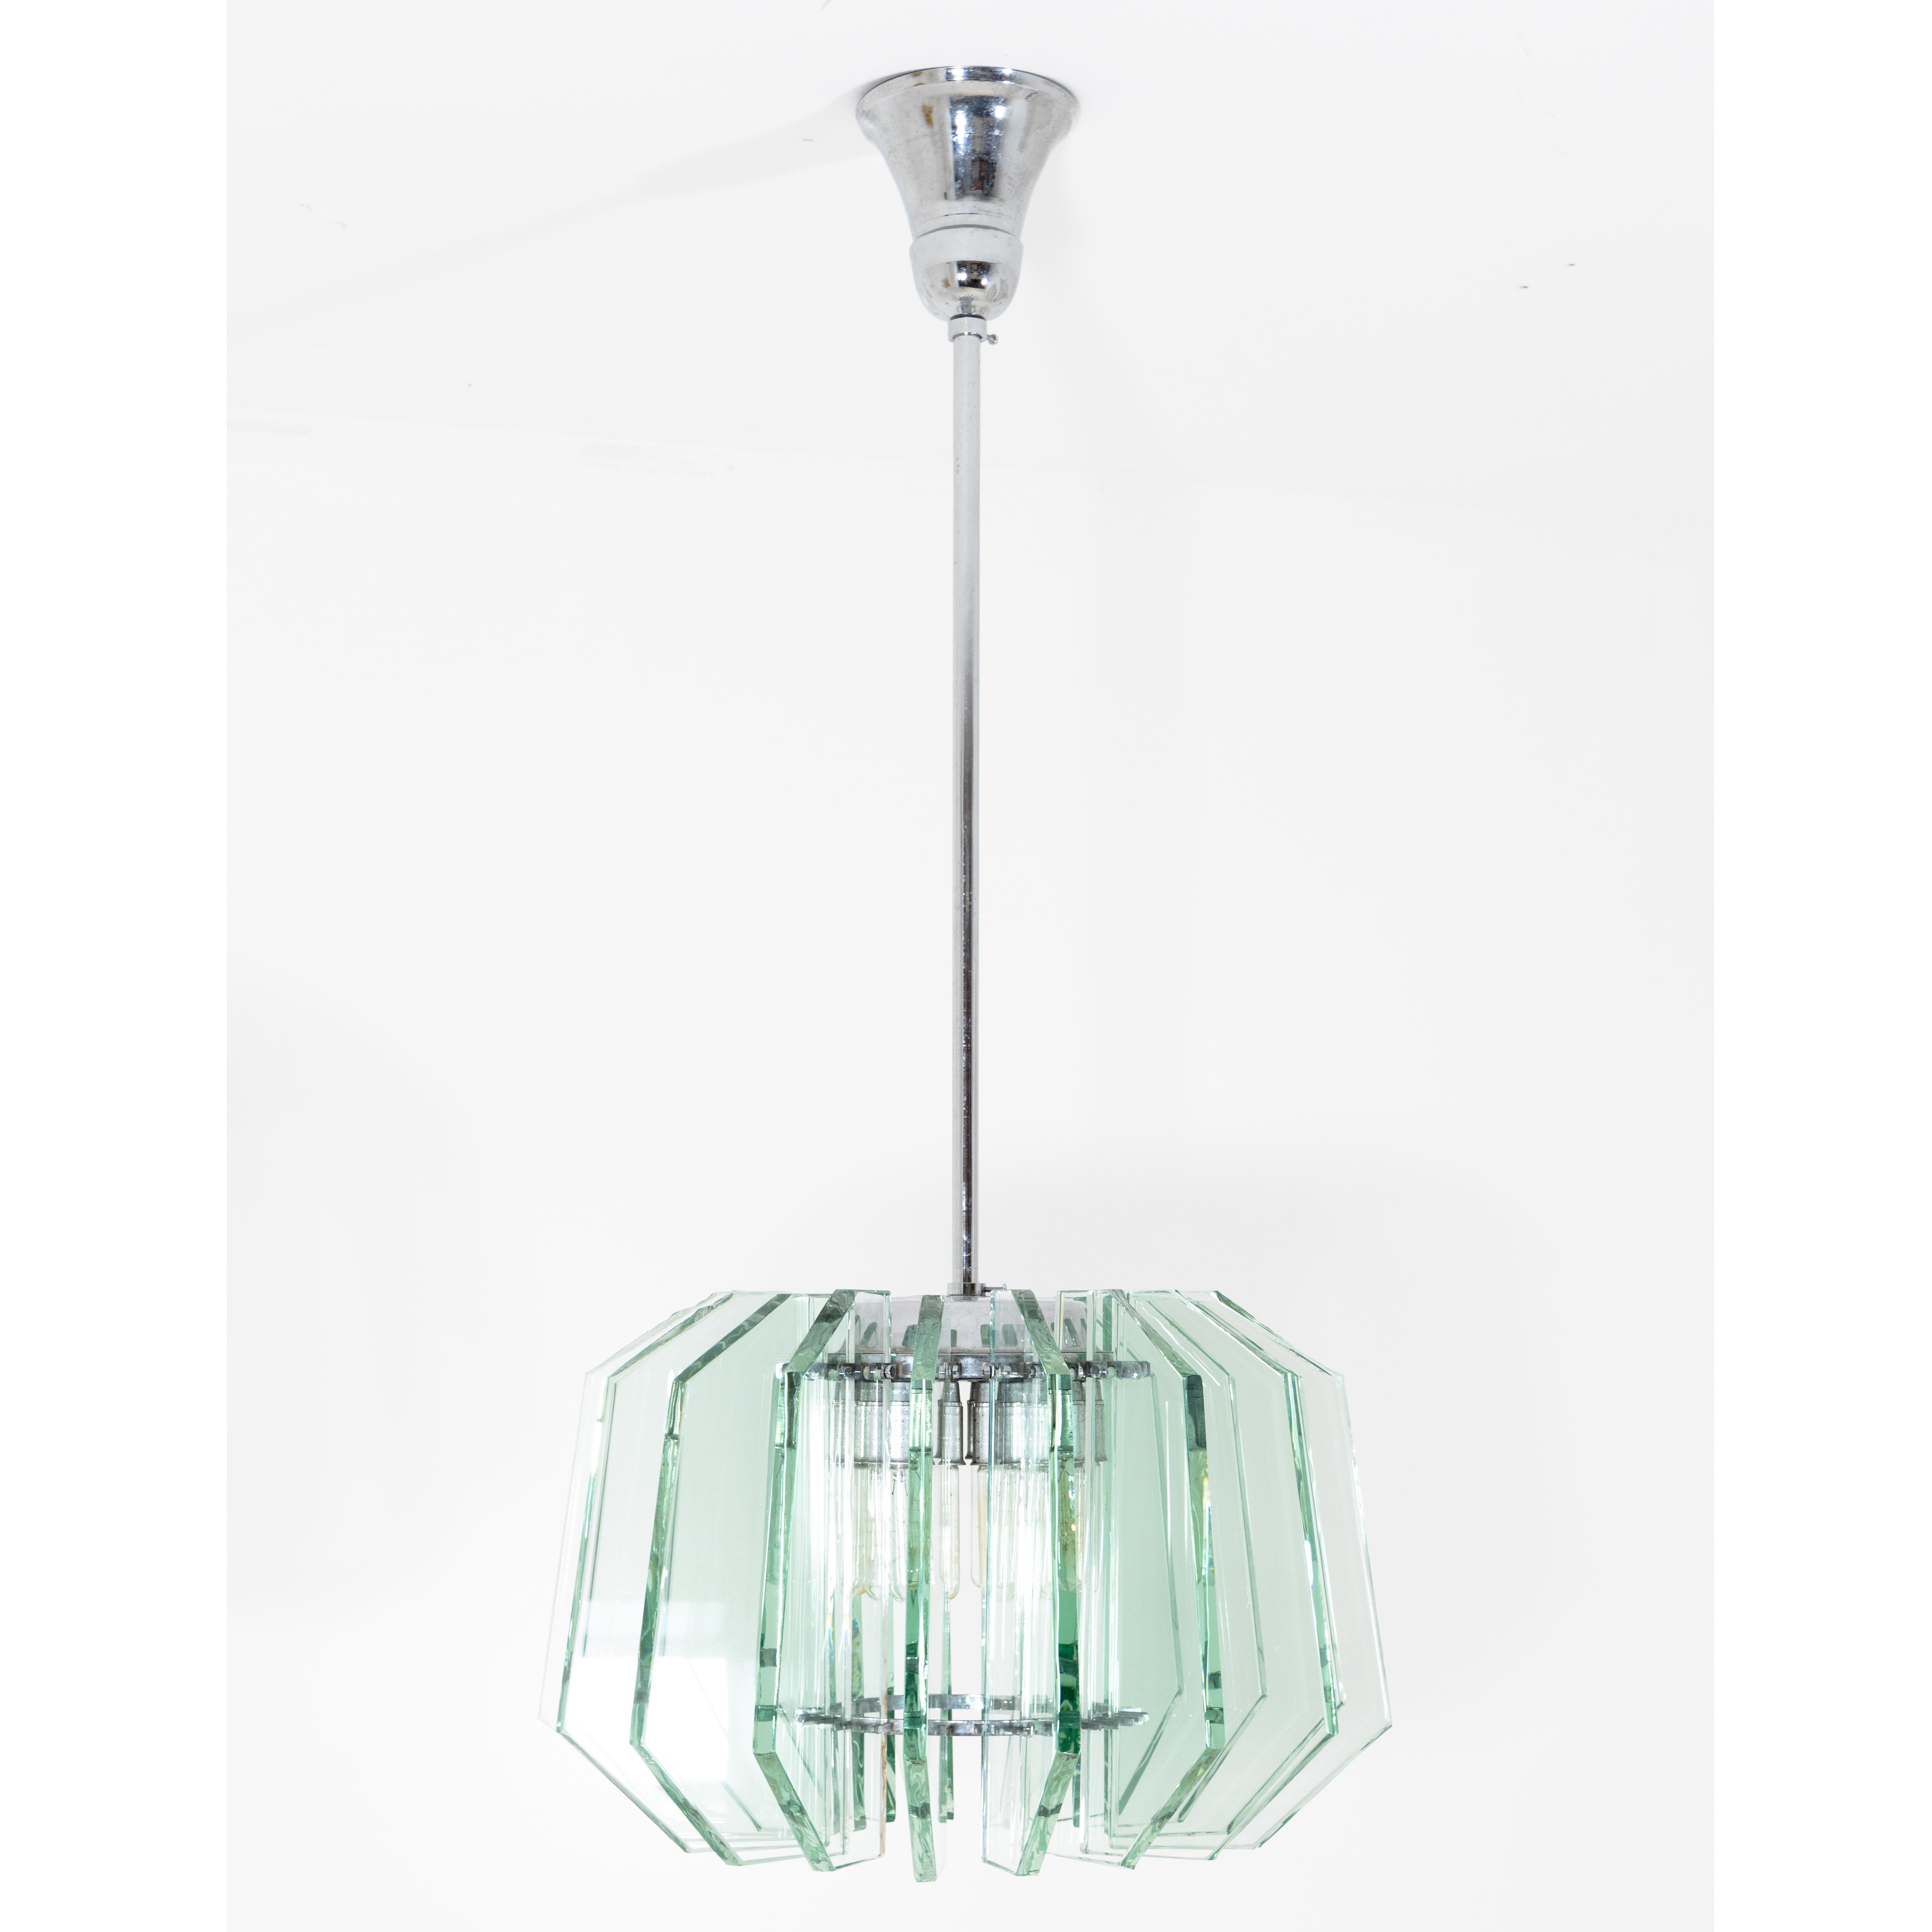 Art Deco pendant lamp suspended from a long chrome-plated rod. Around the centre are 18 green-tinted thick glass panes with beveled corners. The panes have rough edges in some places. The lamp is correspondingly illuminated by 18 radially arranged